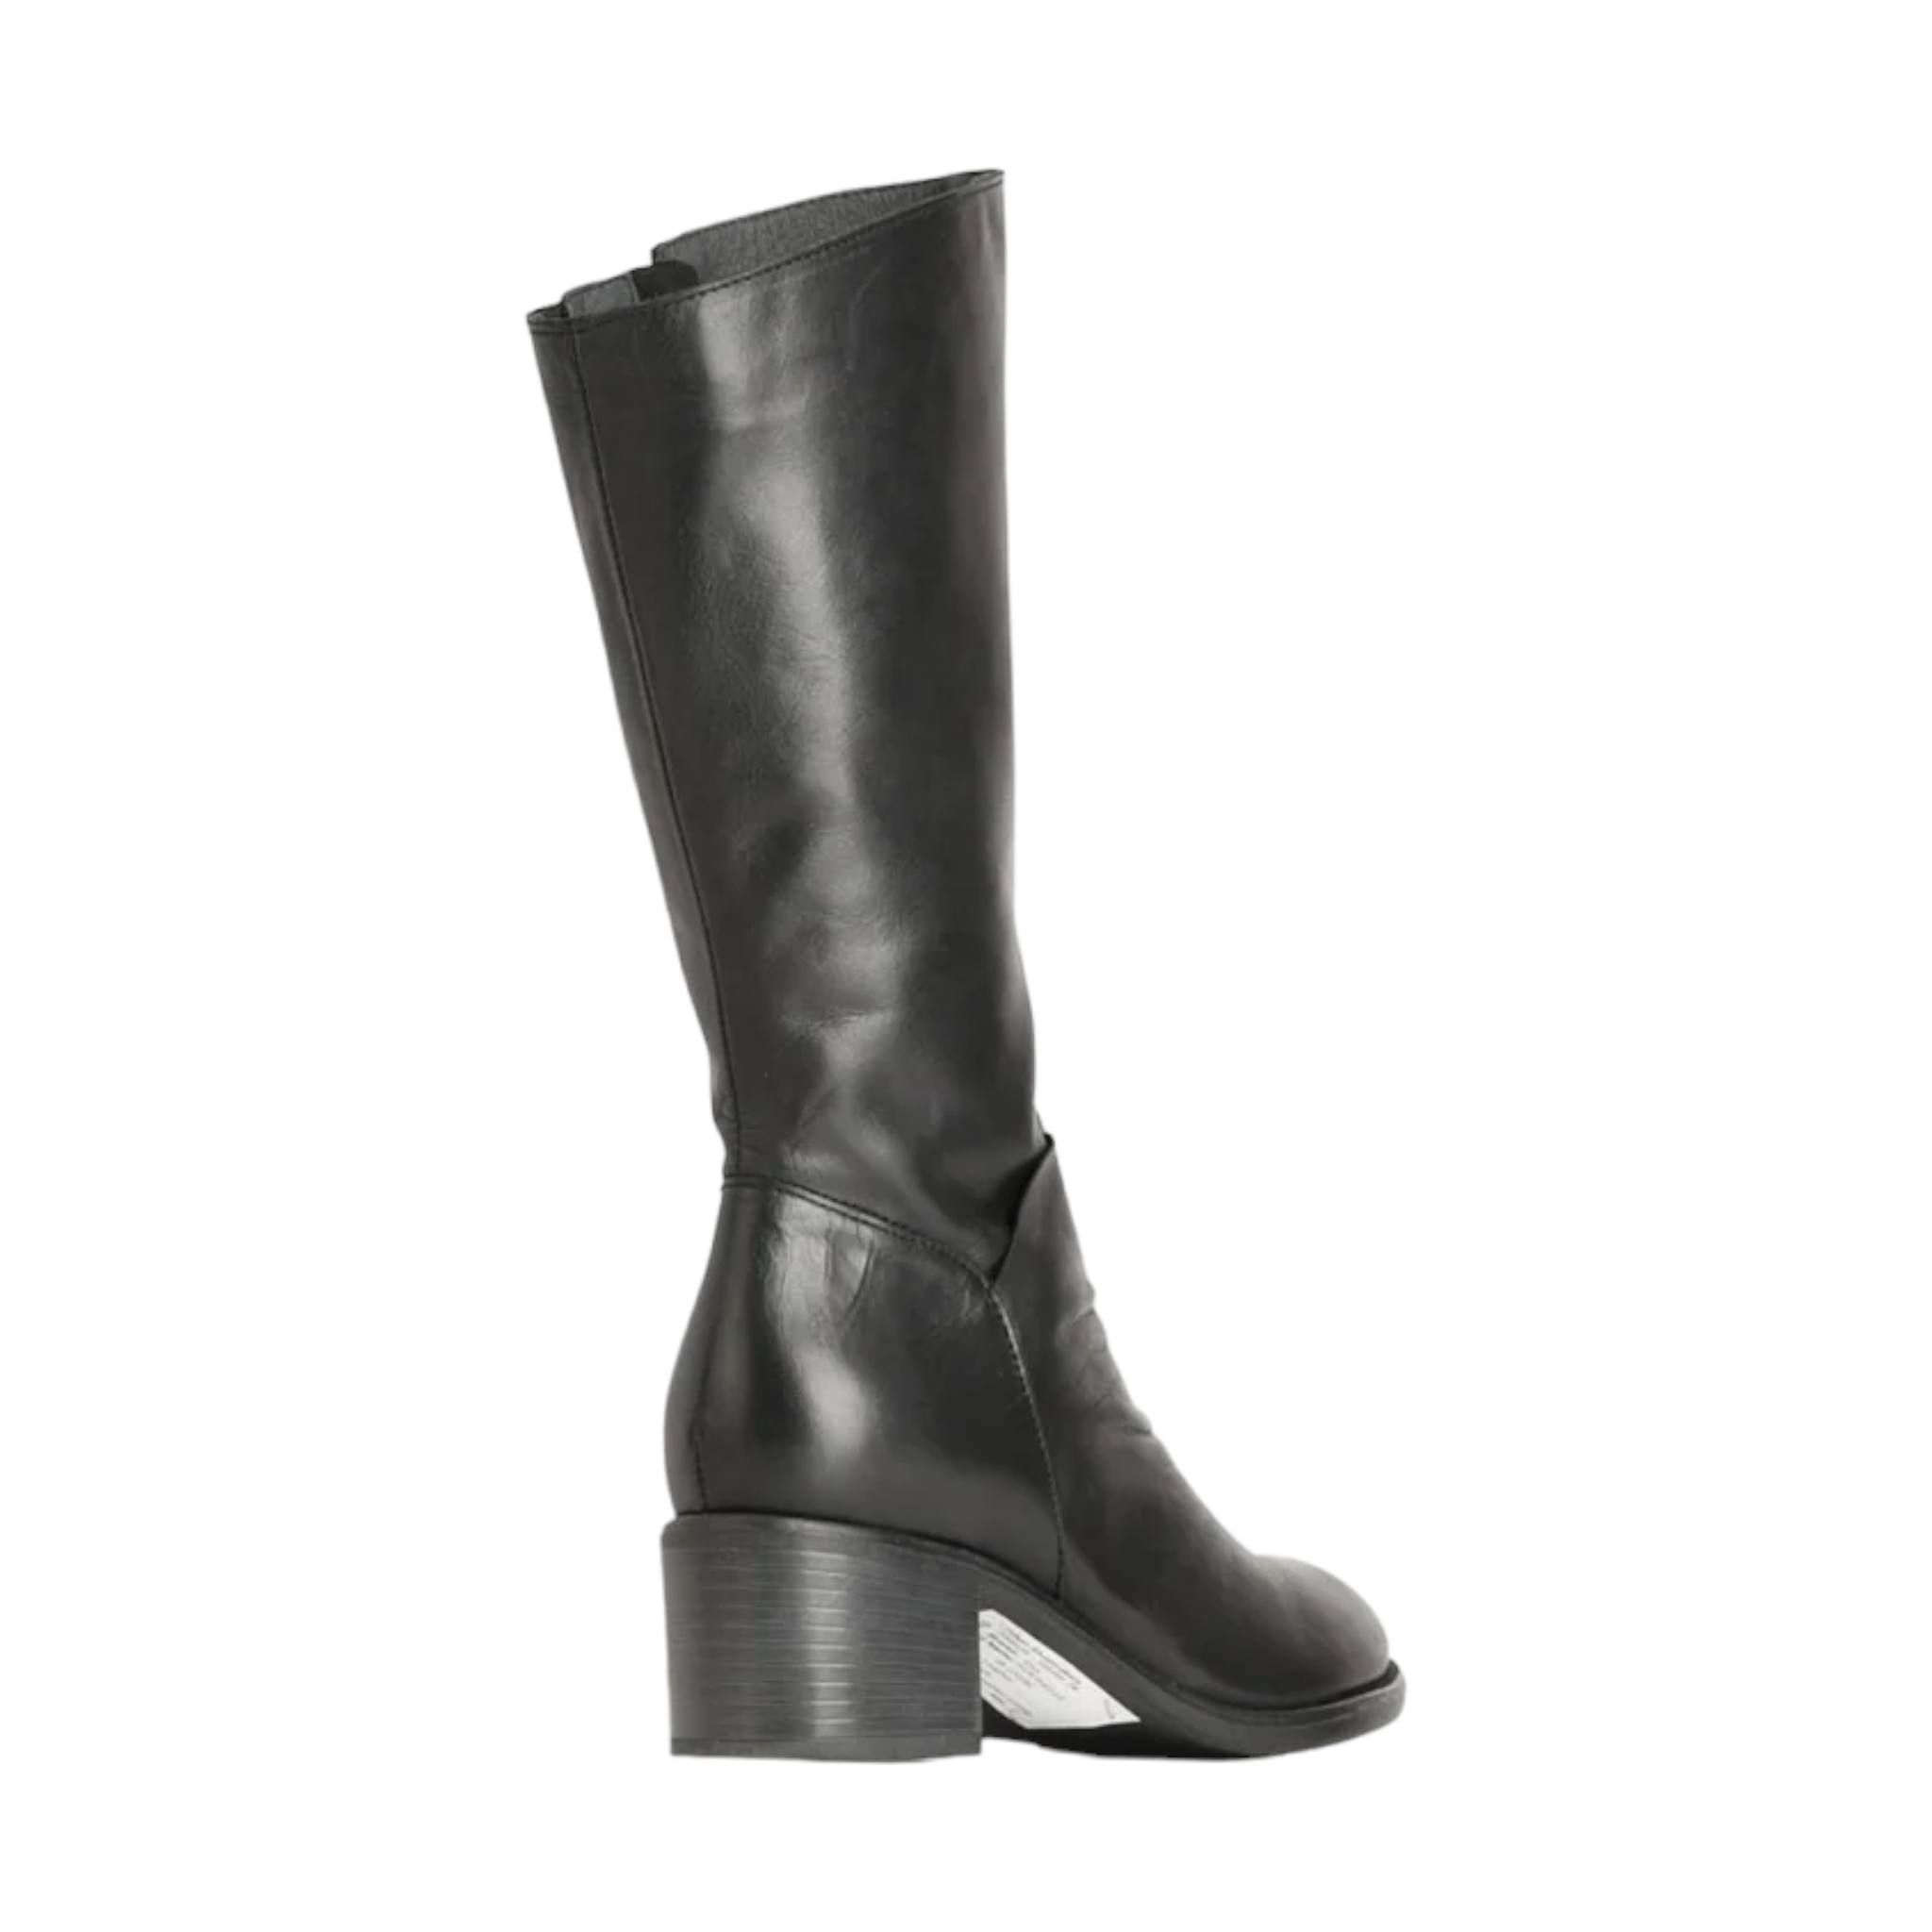 Shop Rochelle EOS - with shoe&me - from EOS - Boots - Boot, Winter, Womens - [collection]